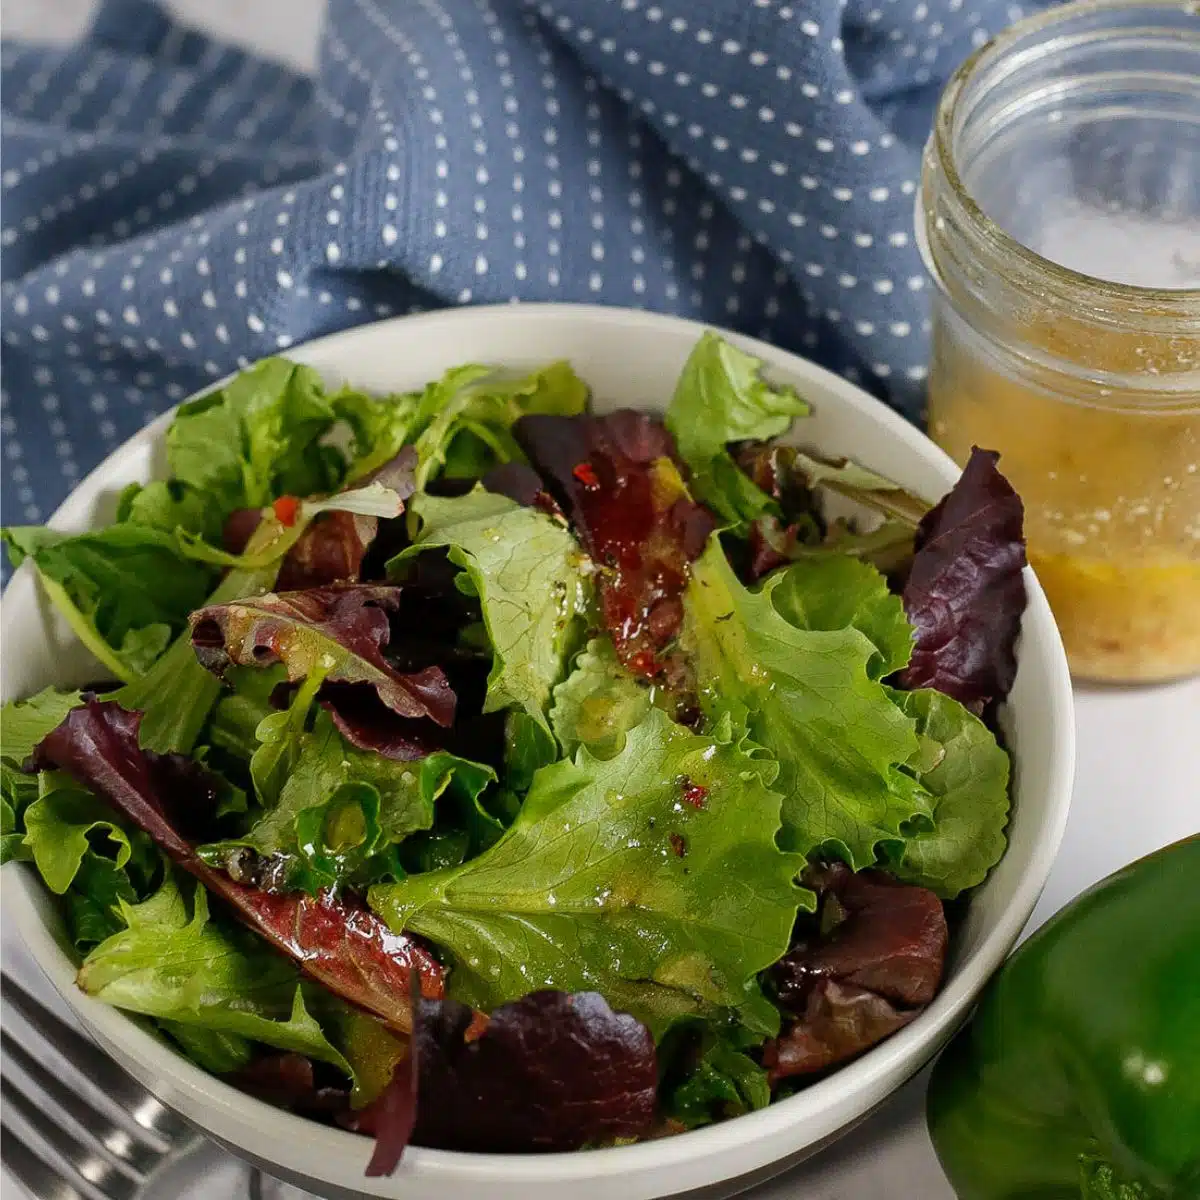 Tasty Italian dressing recipe with homemade dressing in a mason jar and tossed with salad greens in a white bowl.